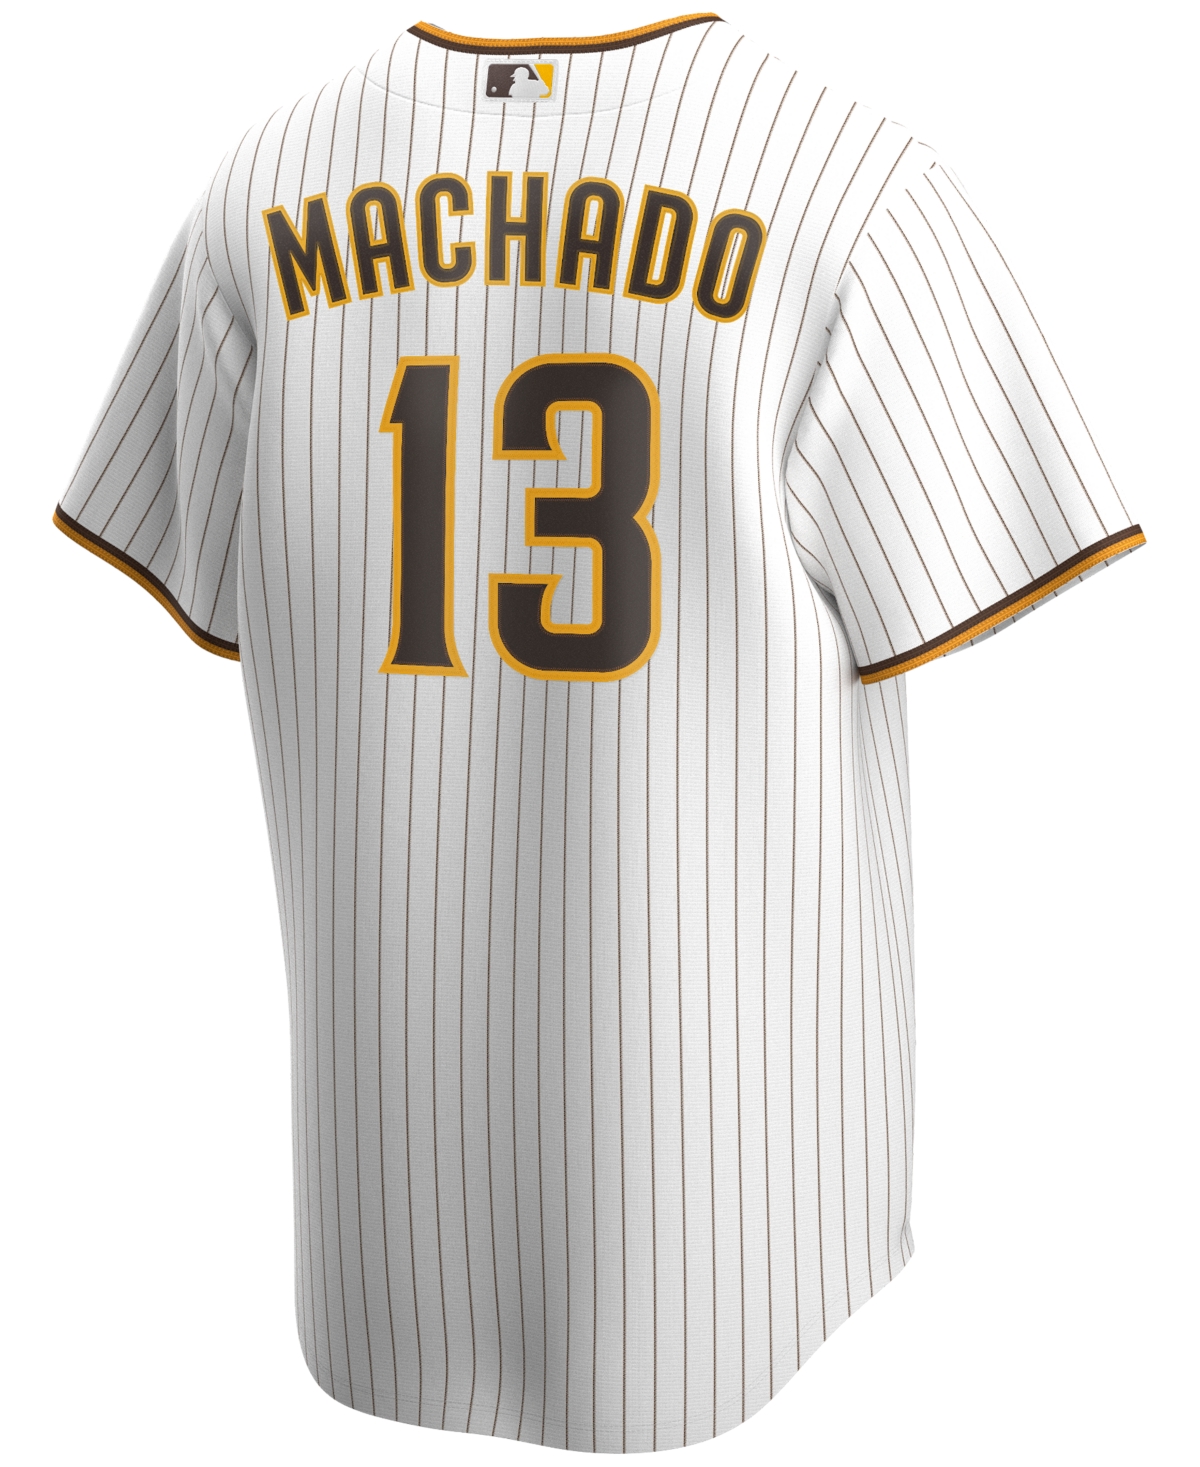 Nike Men's Manny Machado San Diego Padres Official Player Replica Jersey